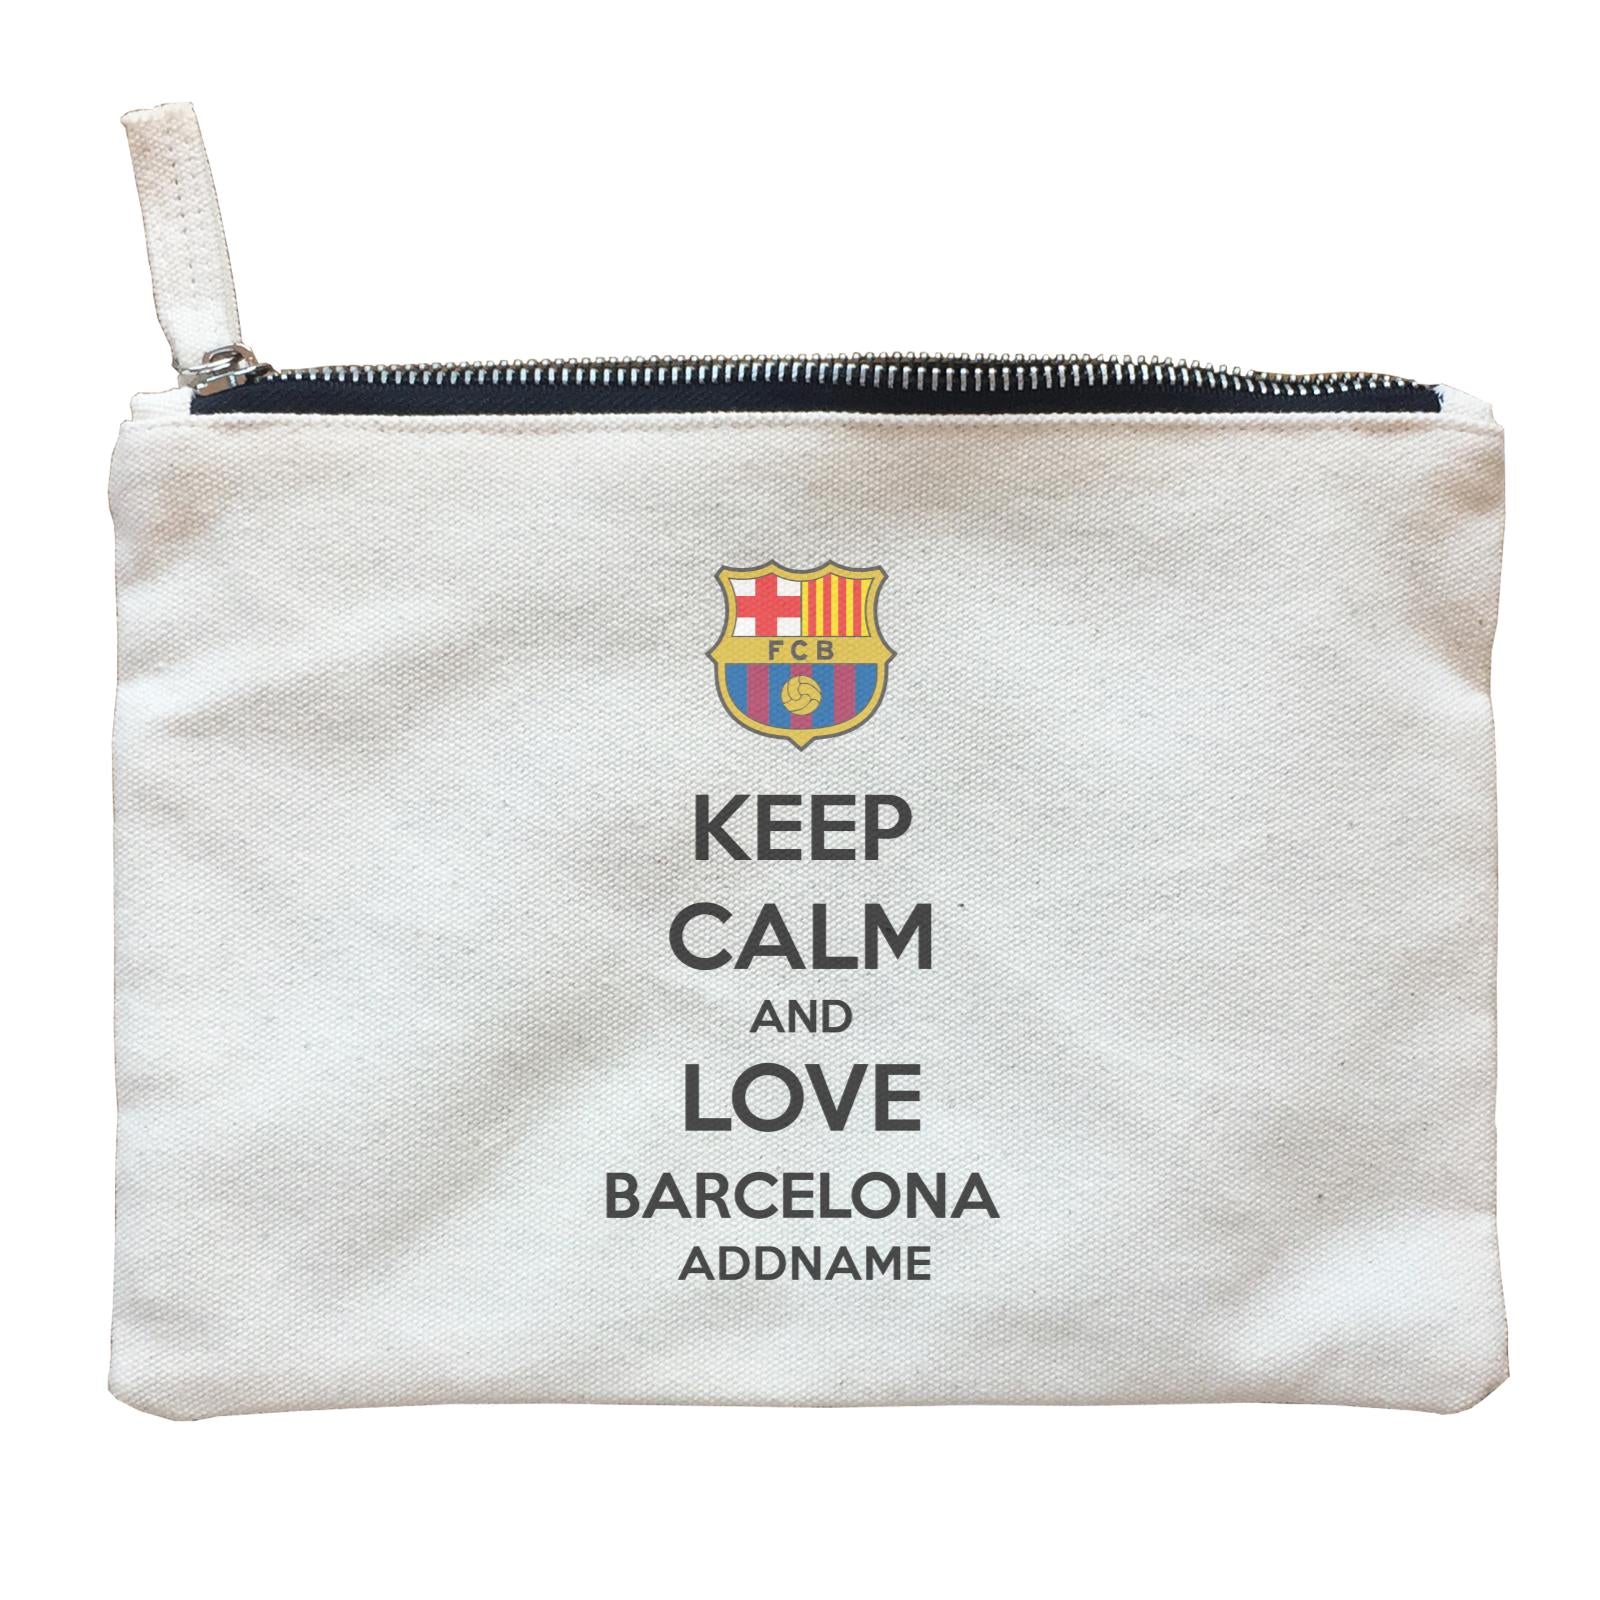 Barcelona Football Keep Calm And Love Series Addname Zipper Pouch